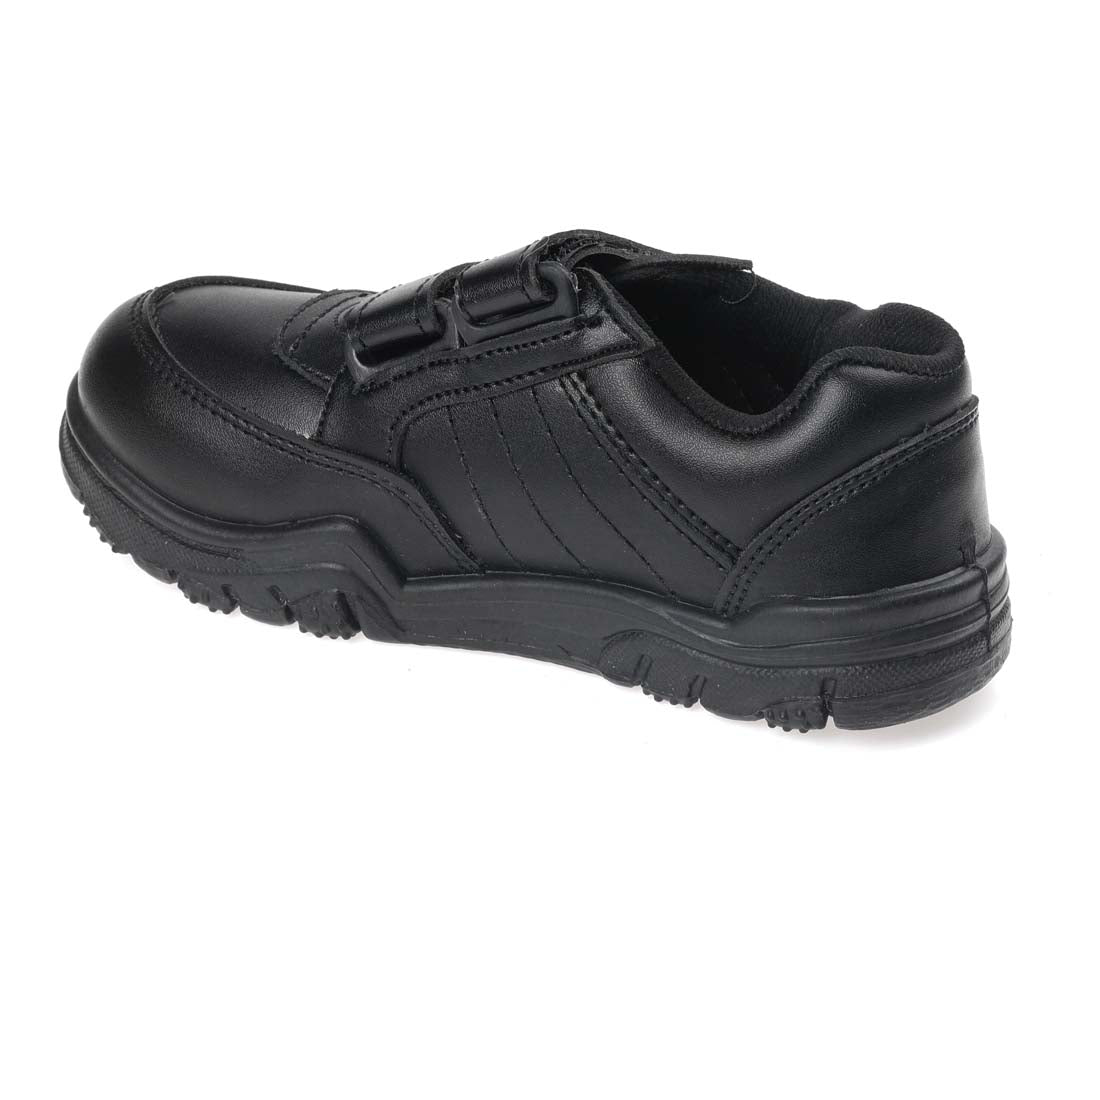 Paragon  PV0026BP Kids Formal School Shoes | Comfortable Cushioned Soles | School Shoes for Boys &amp; Girls